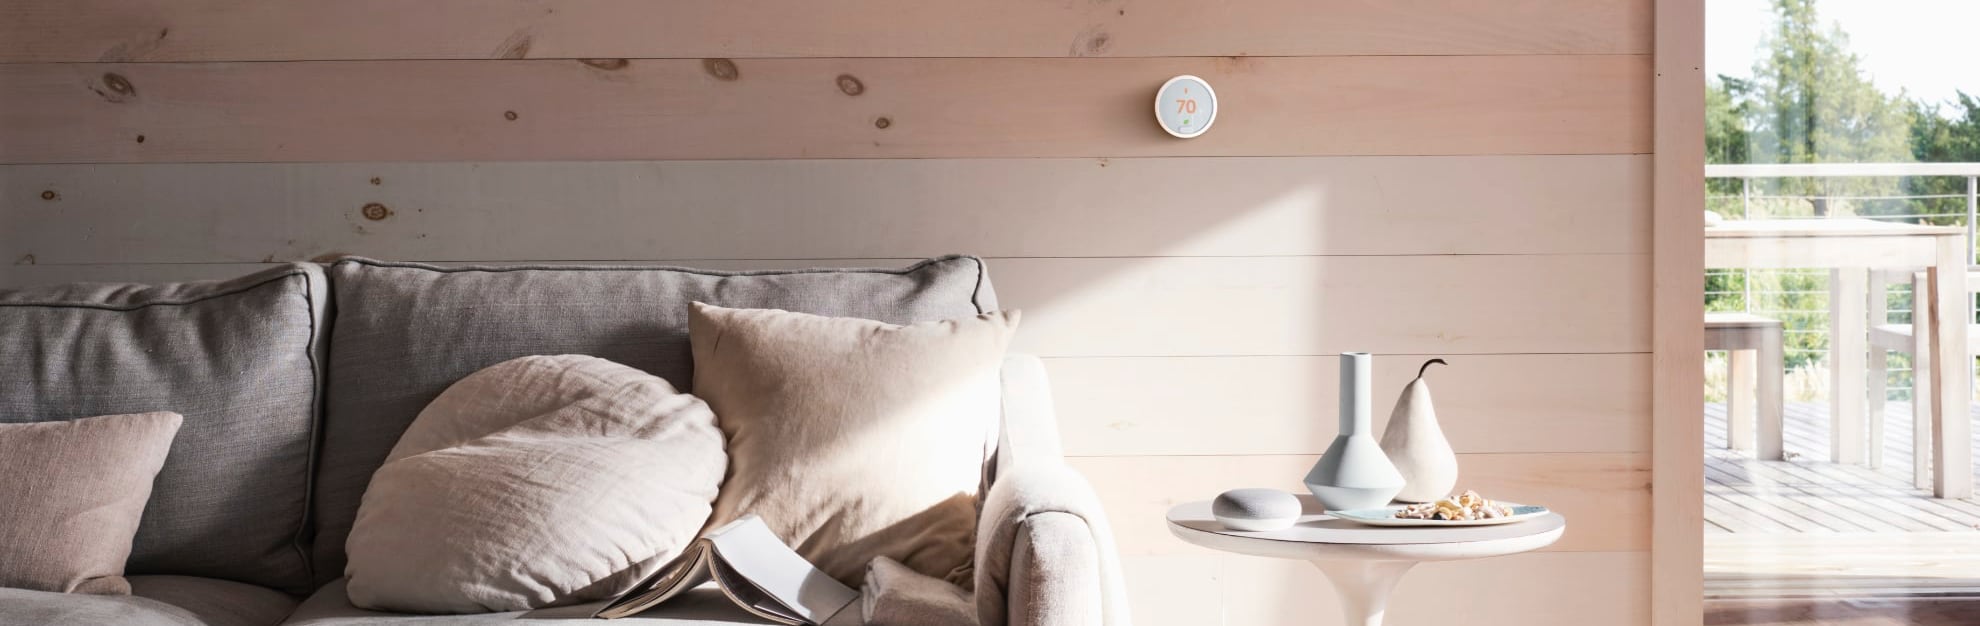 Vivint Home Automation in Baltimore